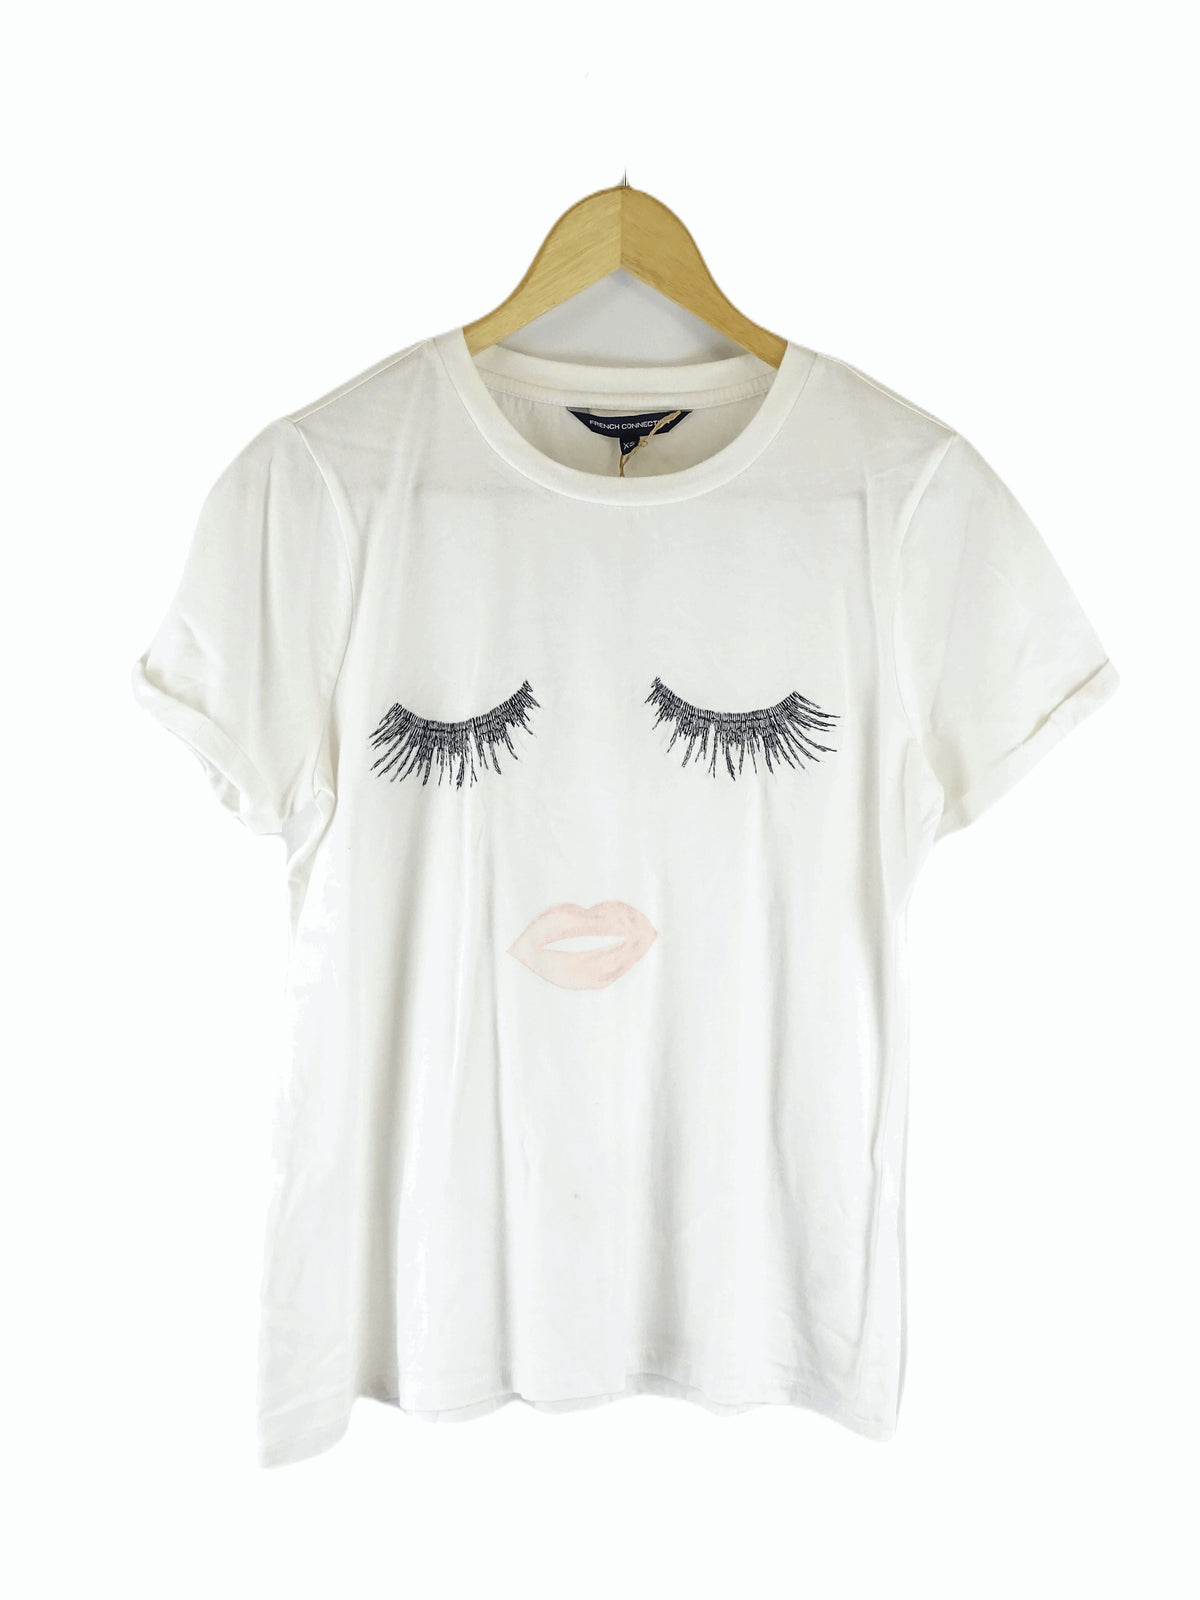 French Connection White T-Shirt XS